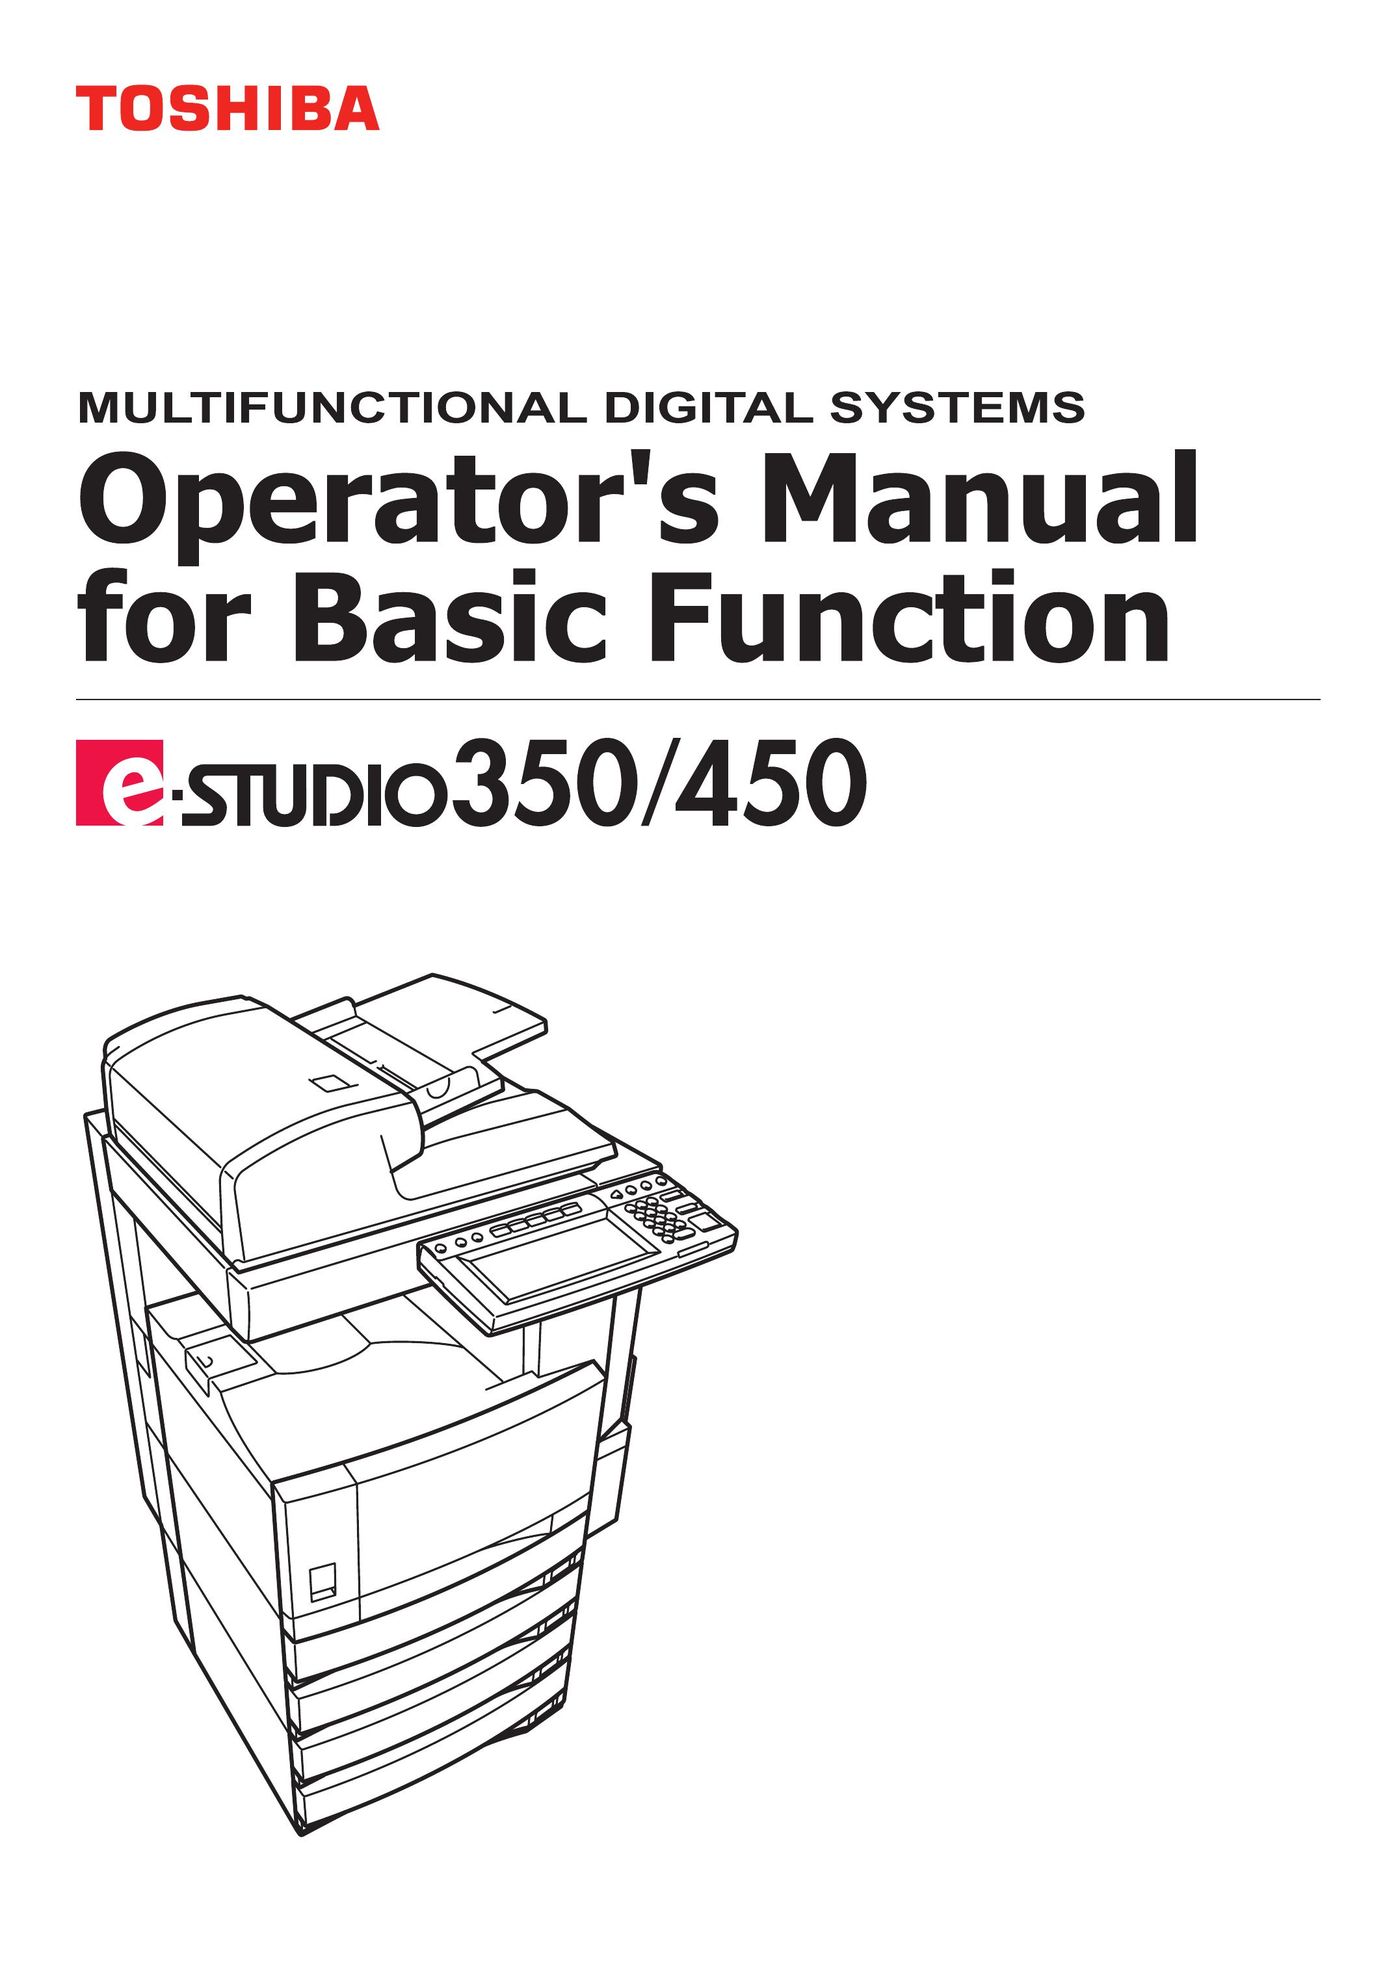 Toshiba 350 All in One Printer User Manual